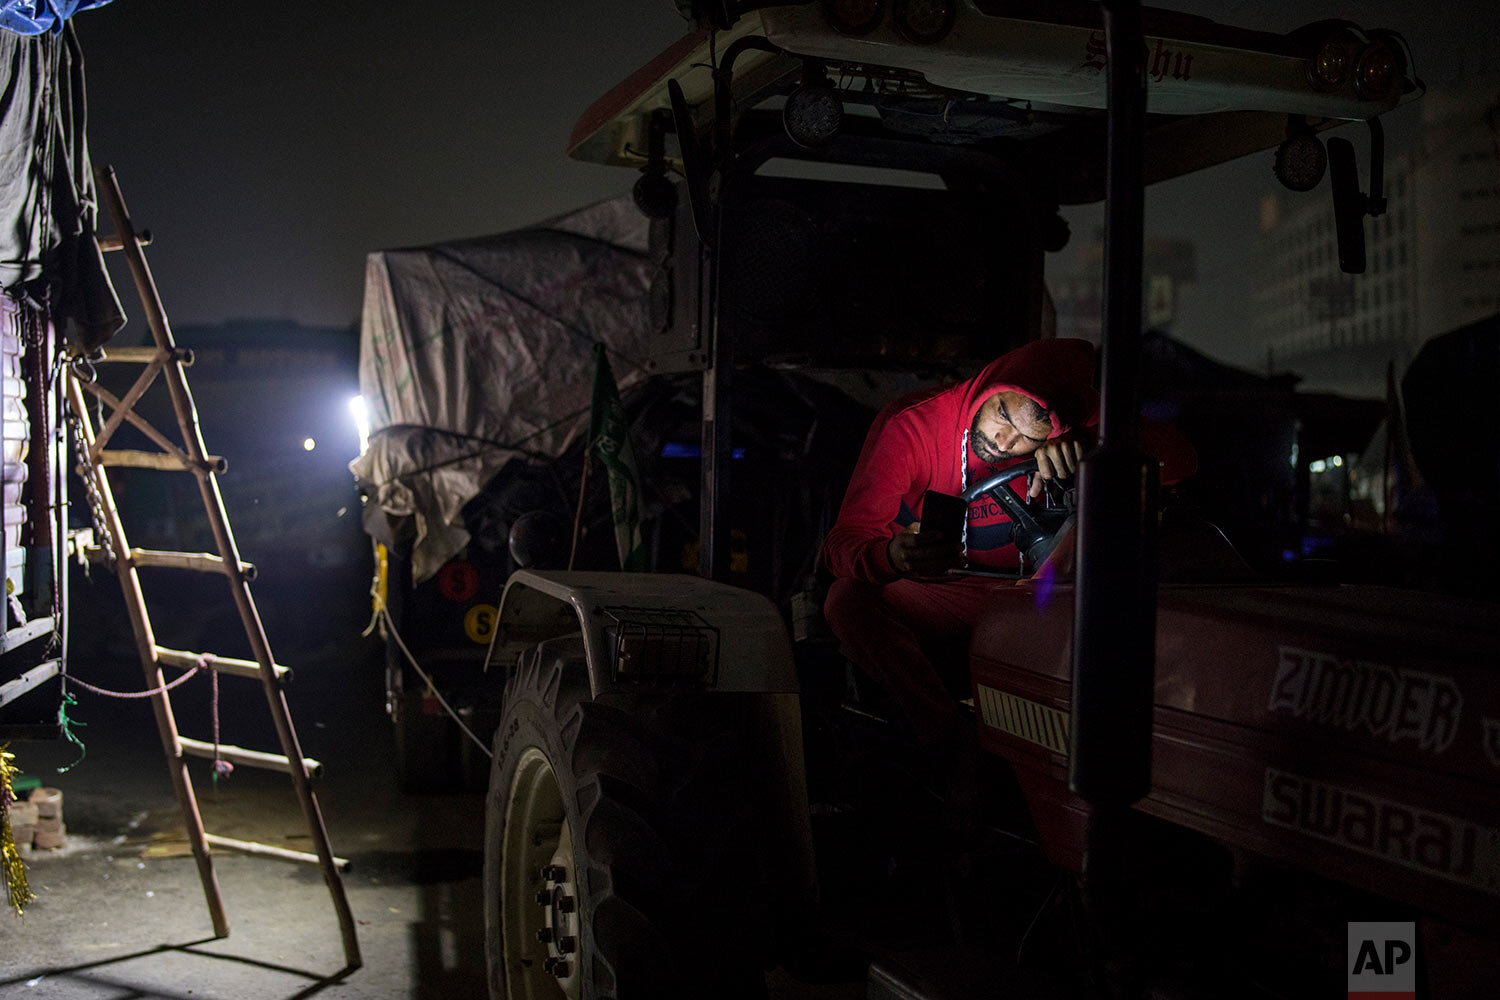  Farmer Brijender Singh, 24, looks at his mobile phone while sitting on his tractor parked on a highway during a protest at the Delhi-Haryana state border, India, Wednesday, Dec. 2, 2020.  (AP Photo/Altaf Qadri) 